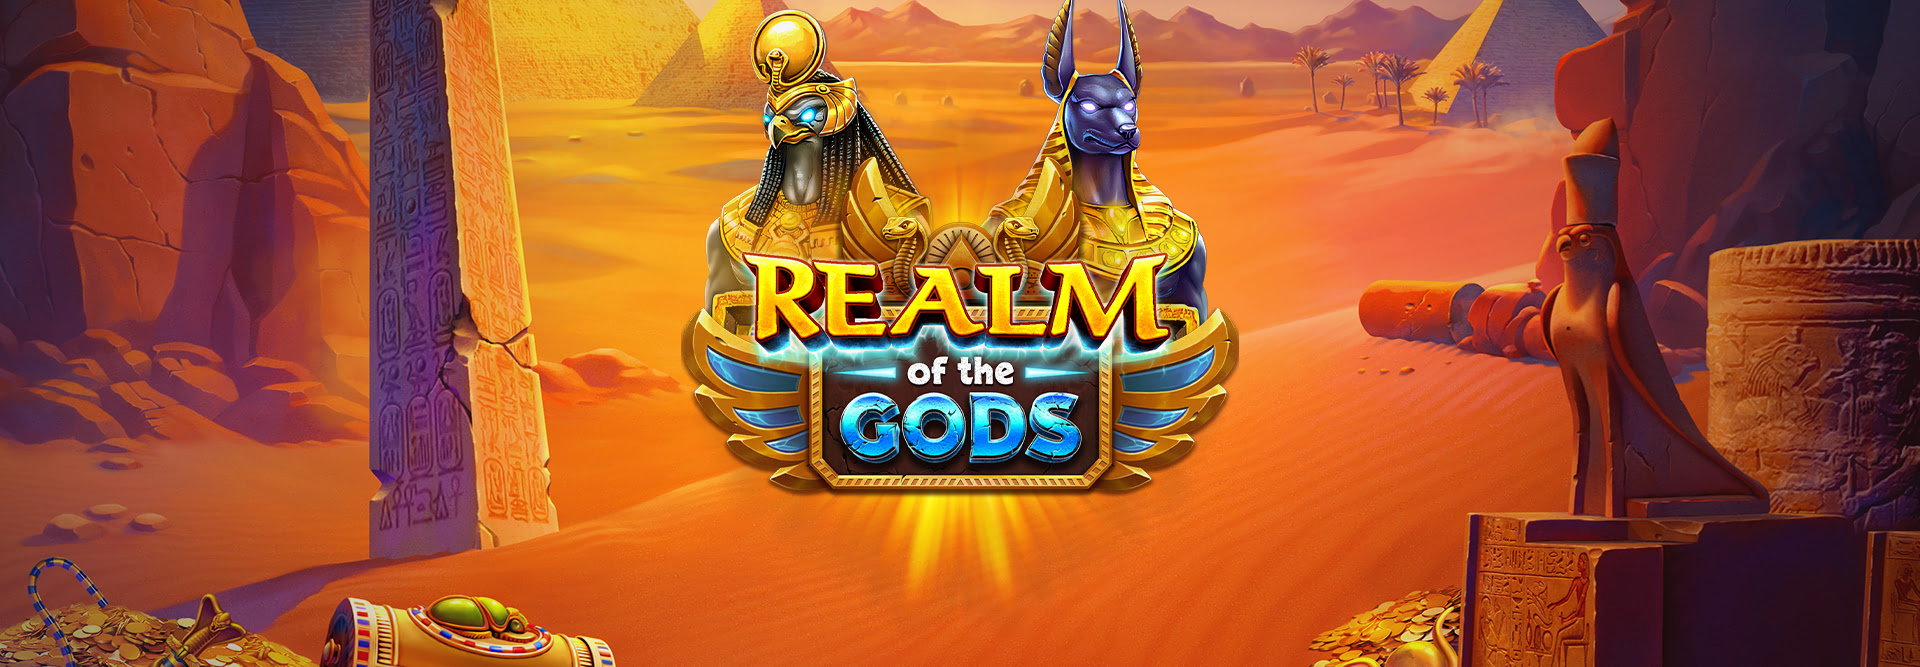 Realm of the Gods image